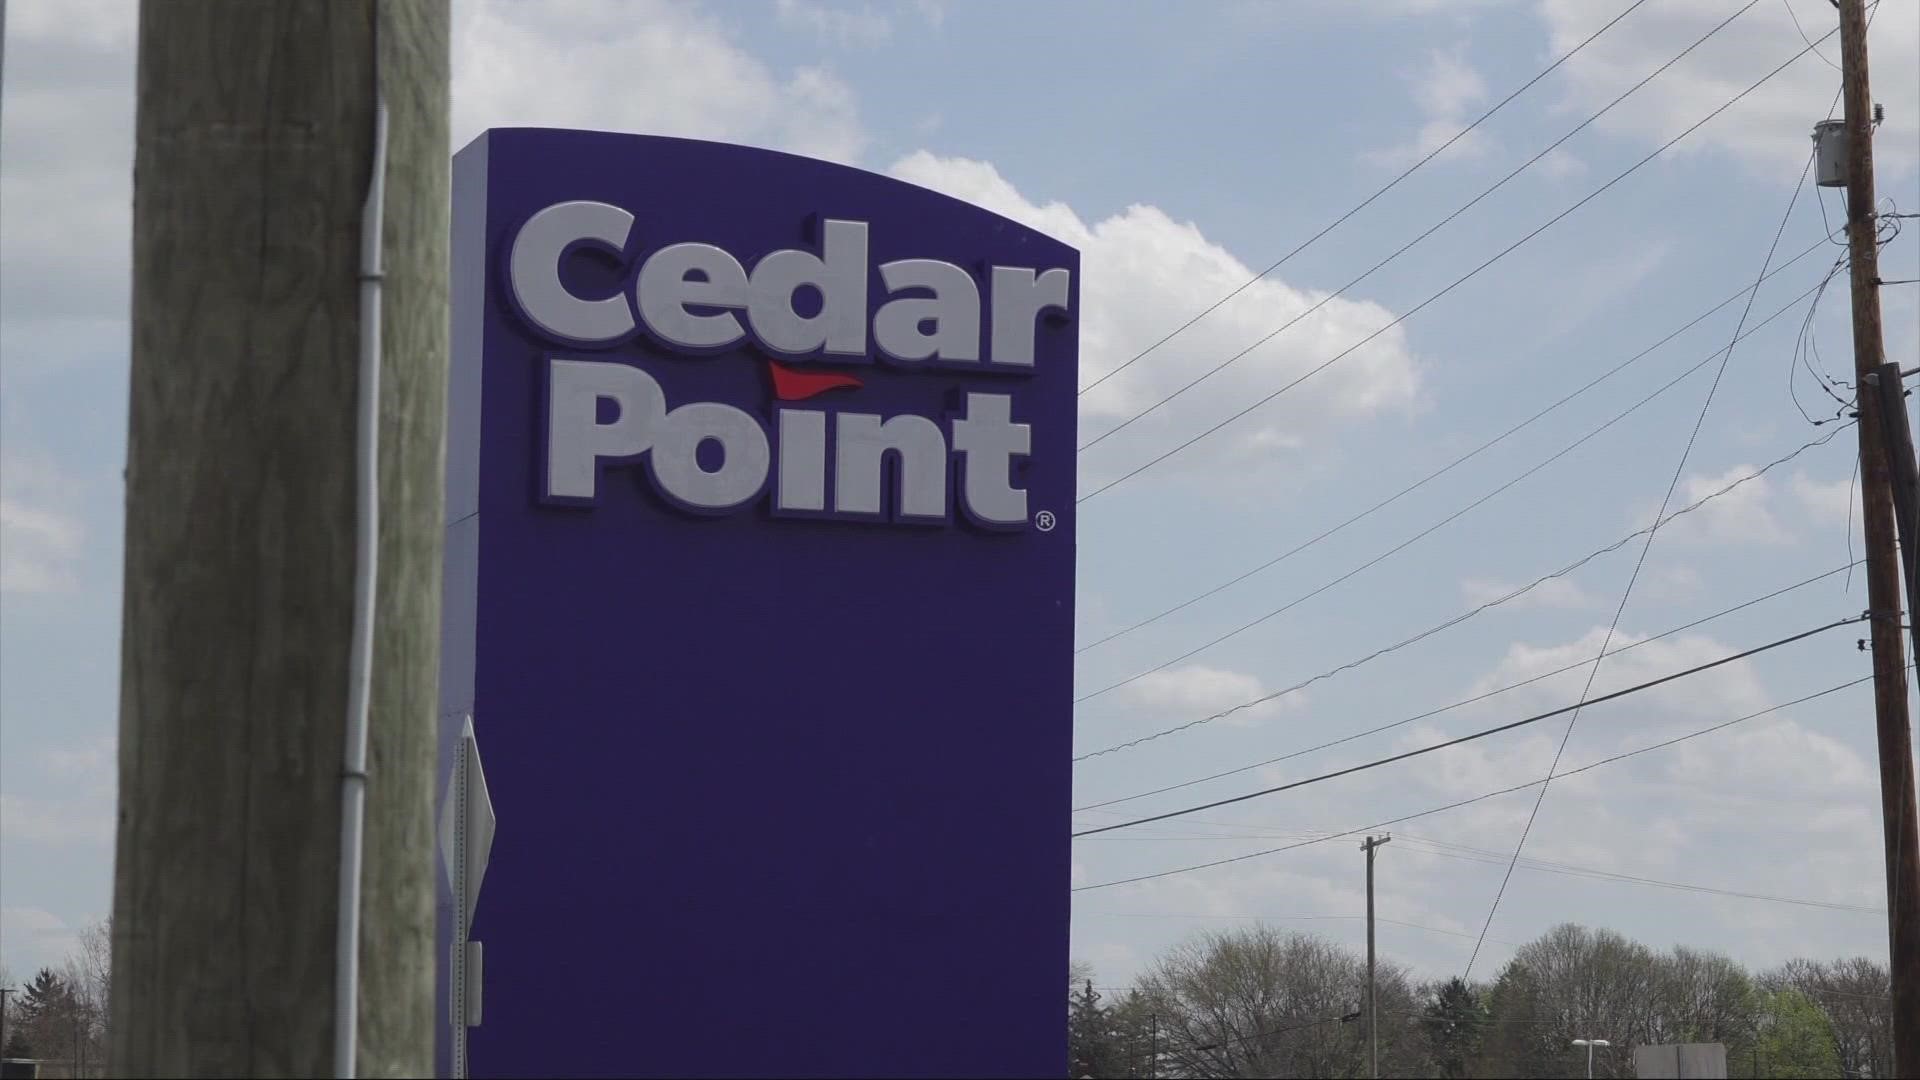 At least 27 sexual assaults were reported to police from inside Cedar Point employee dorms since 2017.  It's led to just 3 arrests and calls for culture change.